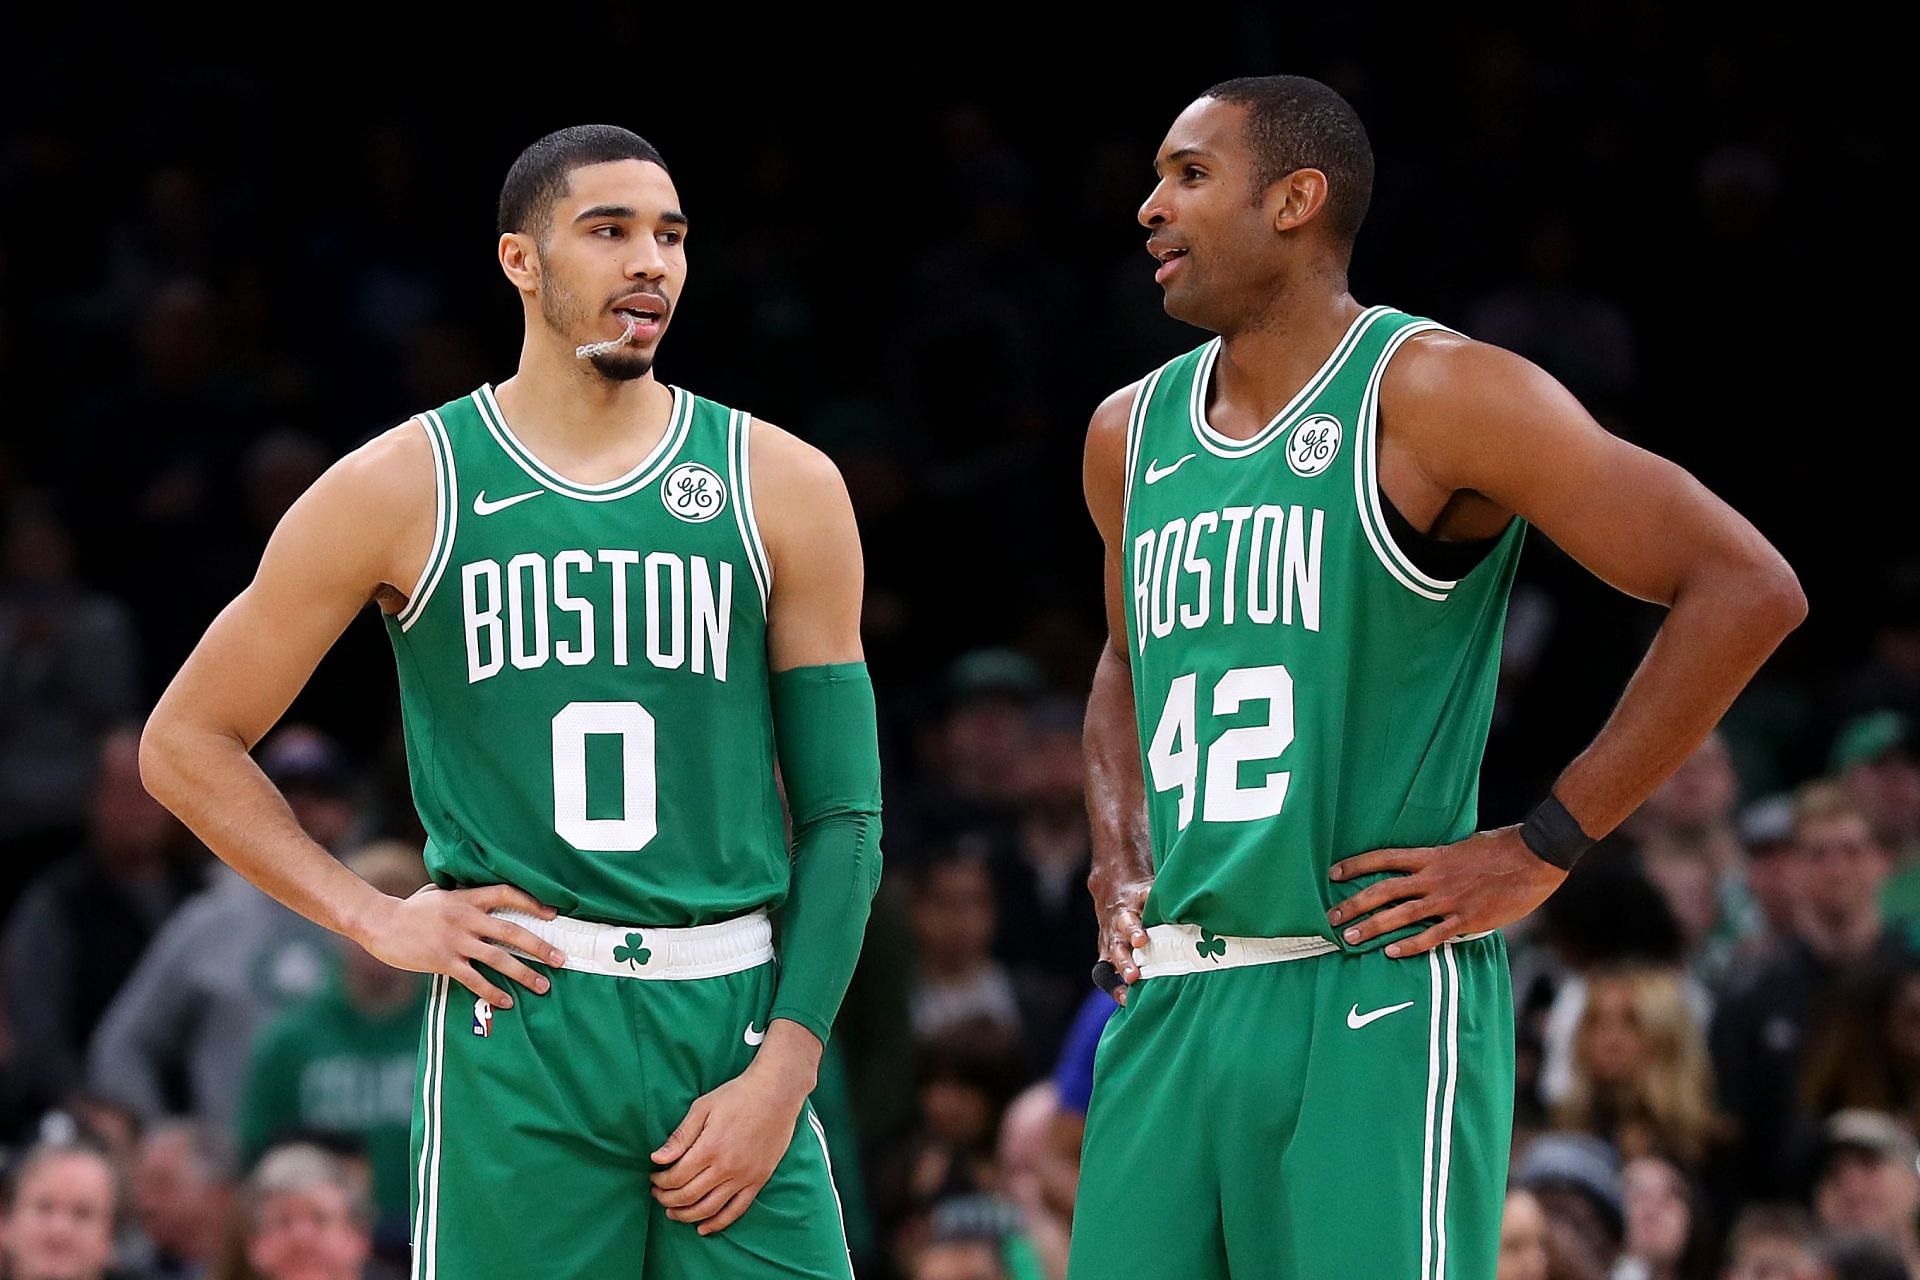 Jayson Tatum and Al Horford combined for 60 points and 21 rebounds in the Boston Celtics&#039; Game 4 win